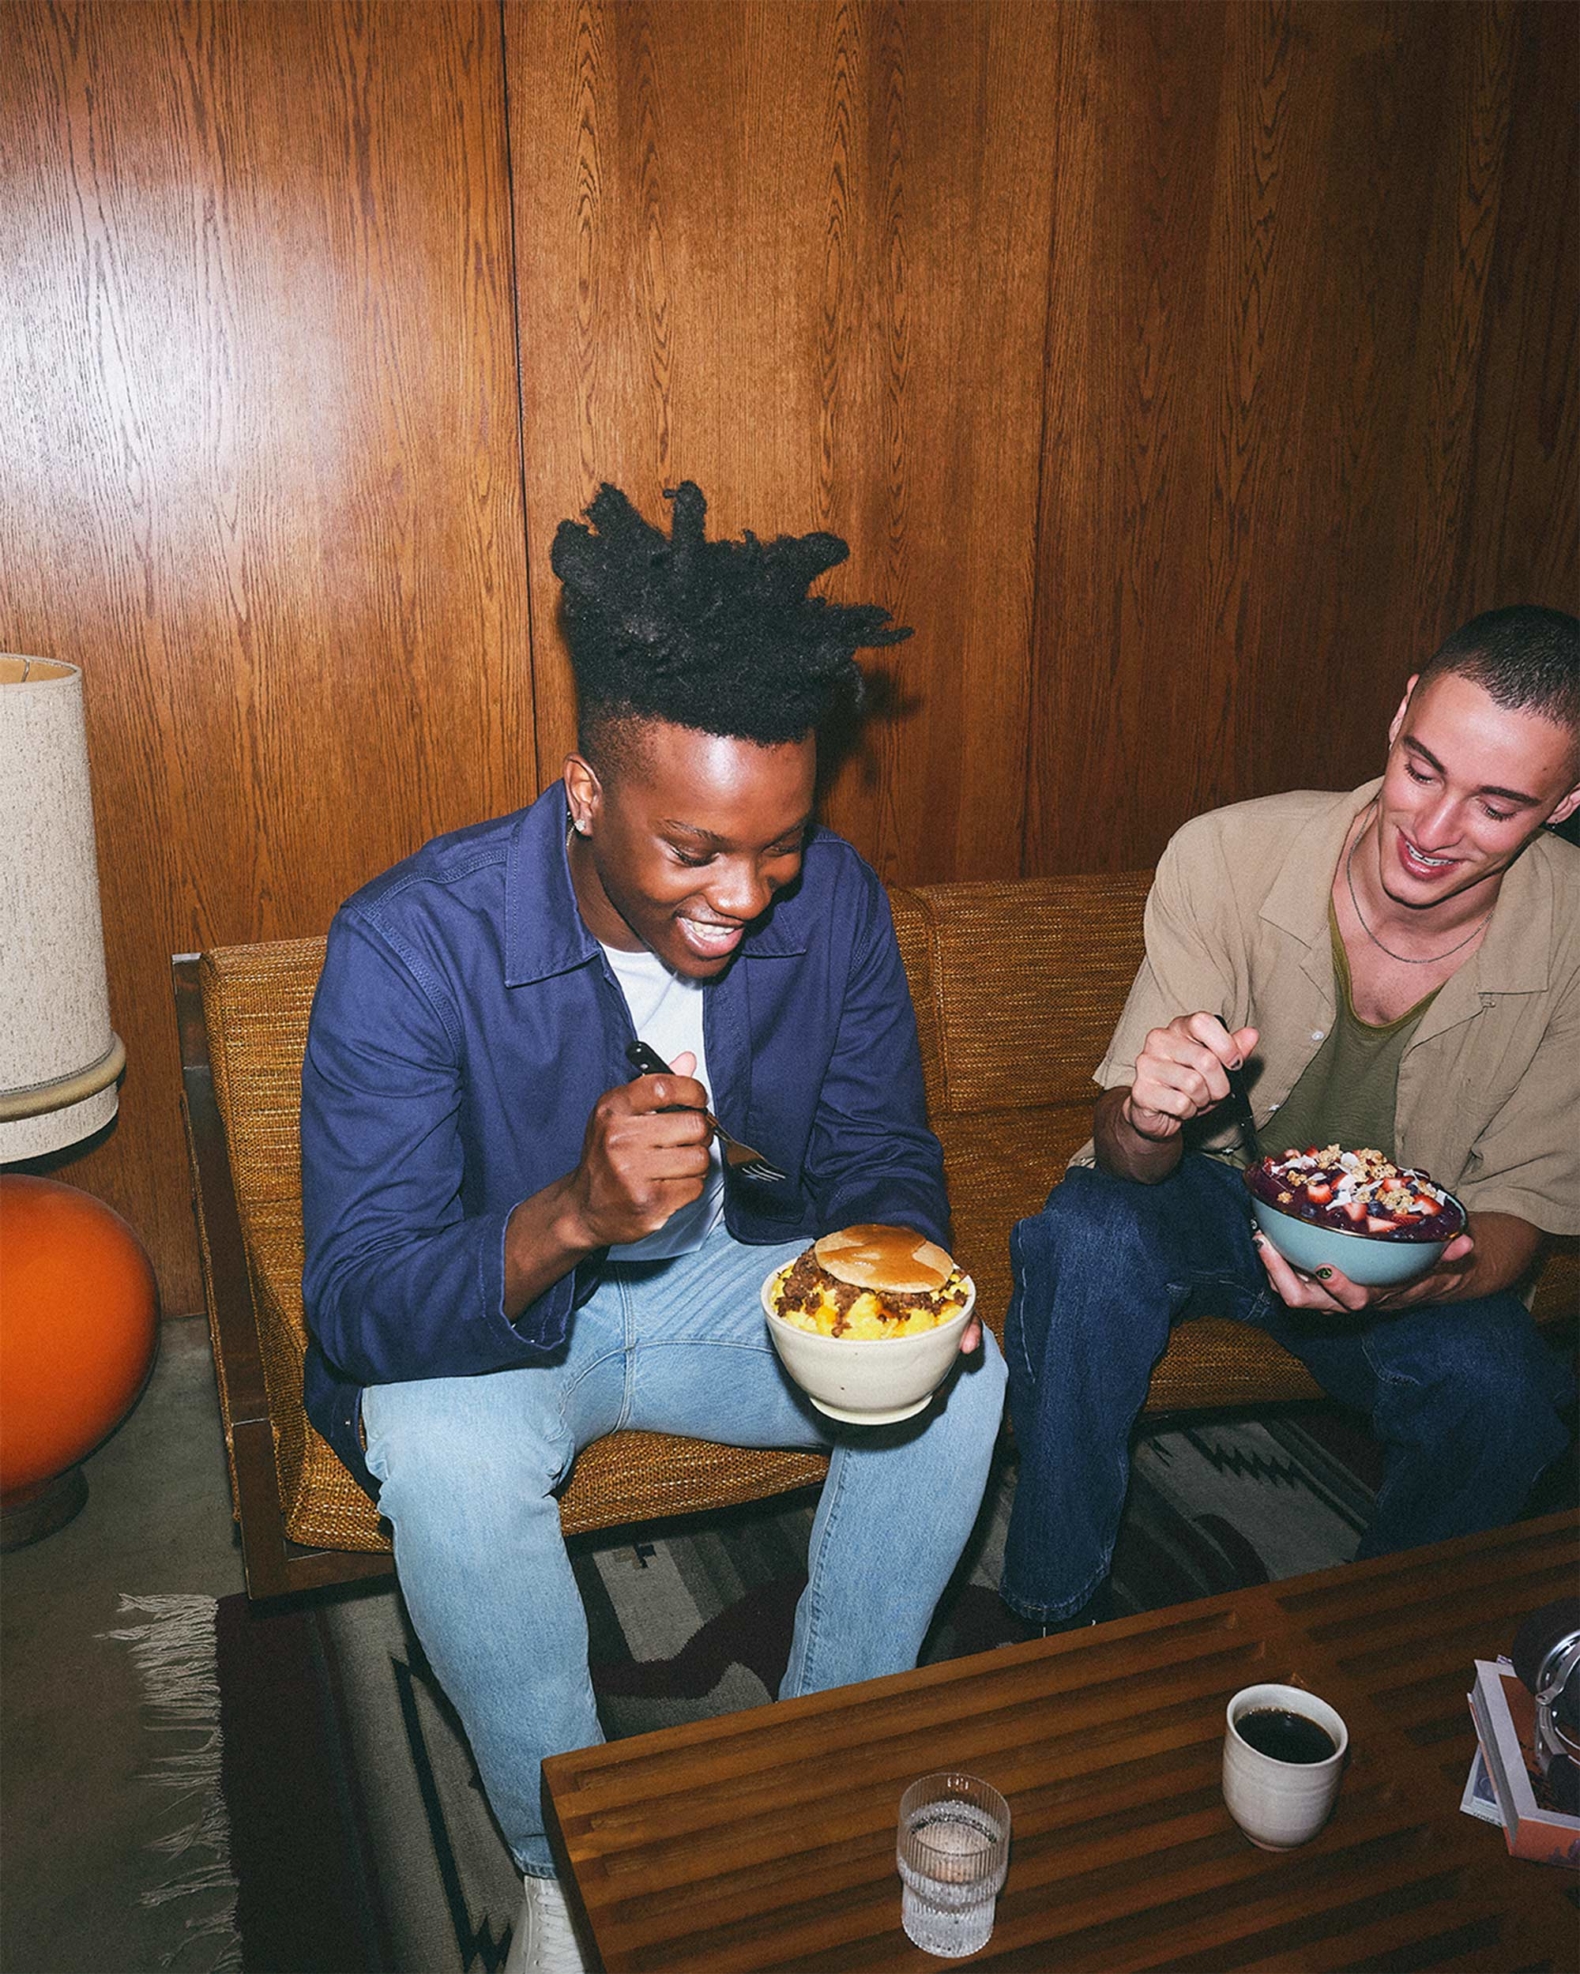 The same man from the first photo - blue bomber jacket - sits on a 70’s style couch eating a bowl of cooked food next to another man in a tan t-shirt eating a meal from a blue bowl. There is a dark wooden coffee table in front of them with a glass of water and a mug of coffee. An orange floor lamp with large white lamp shade is to the left of the couch.